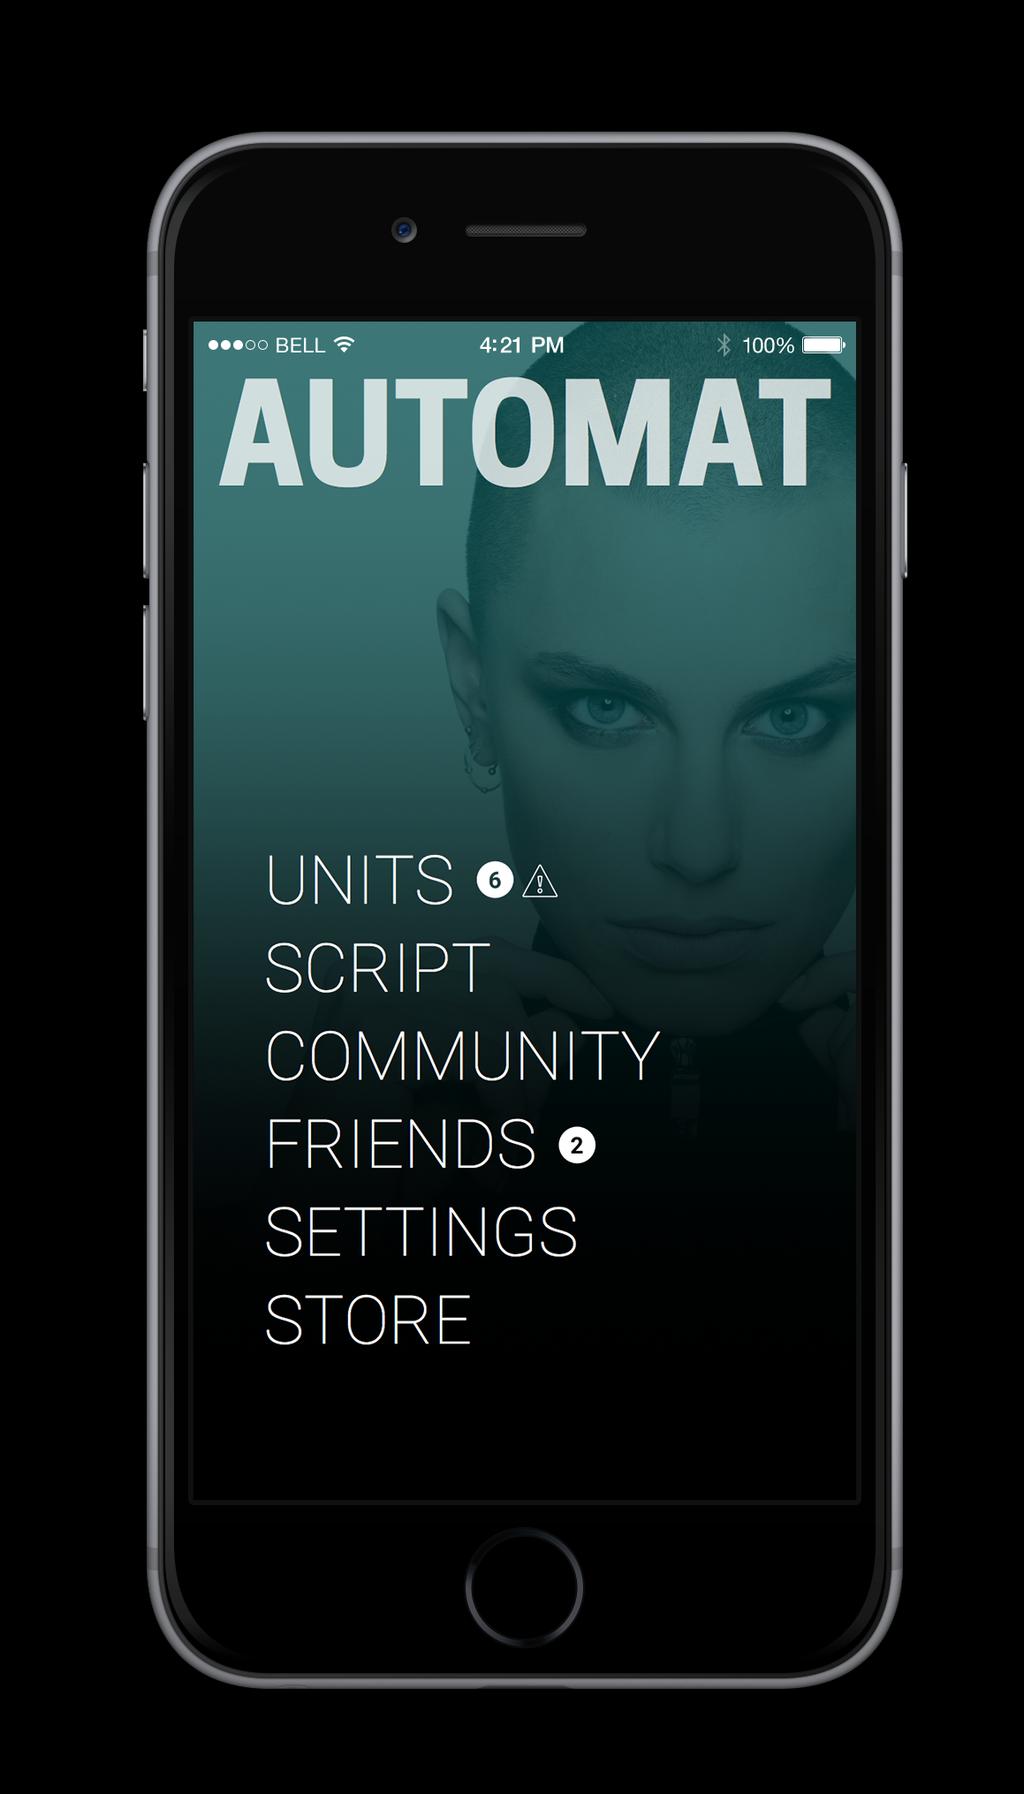 IOS & ANDROID Rapid development of your smart devices. With the Automat ios/android App you will be able to easily prototype your IoT ideas without the need for programming skills.